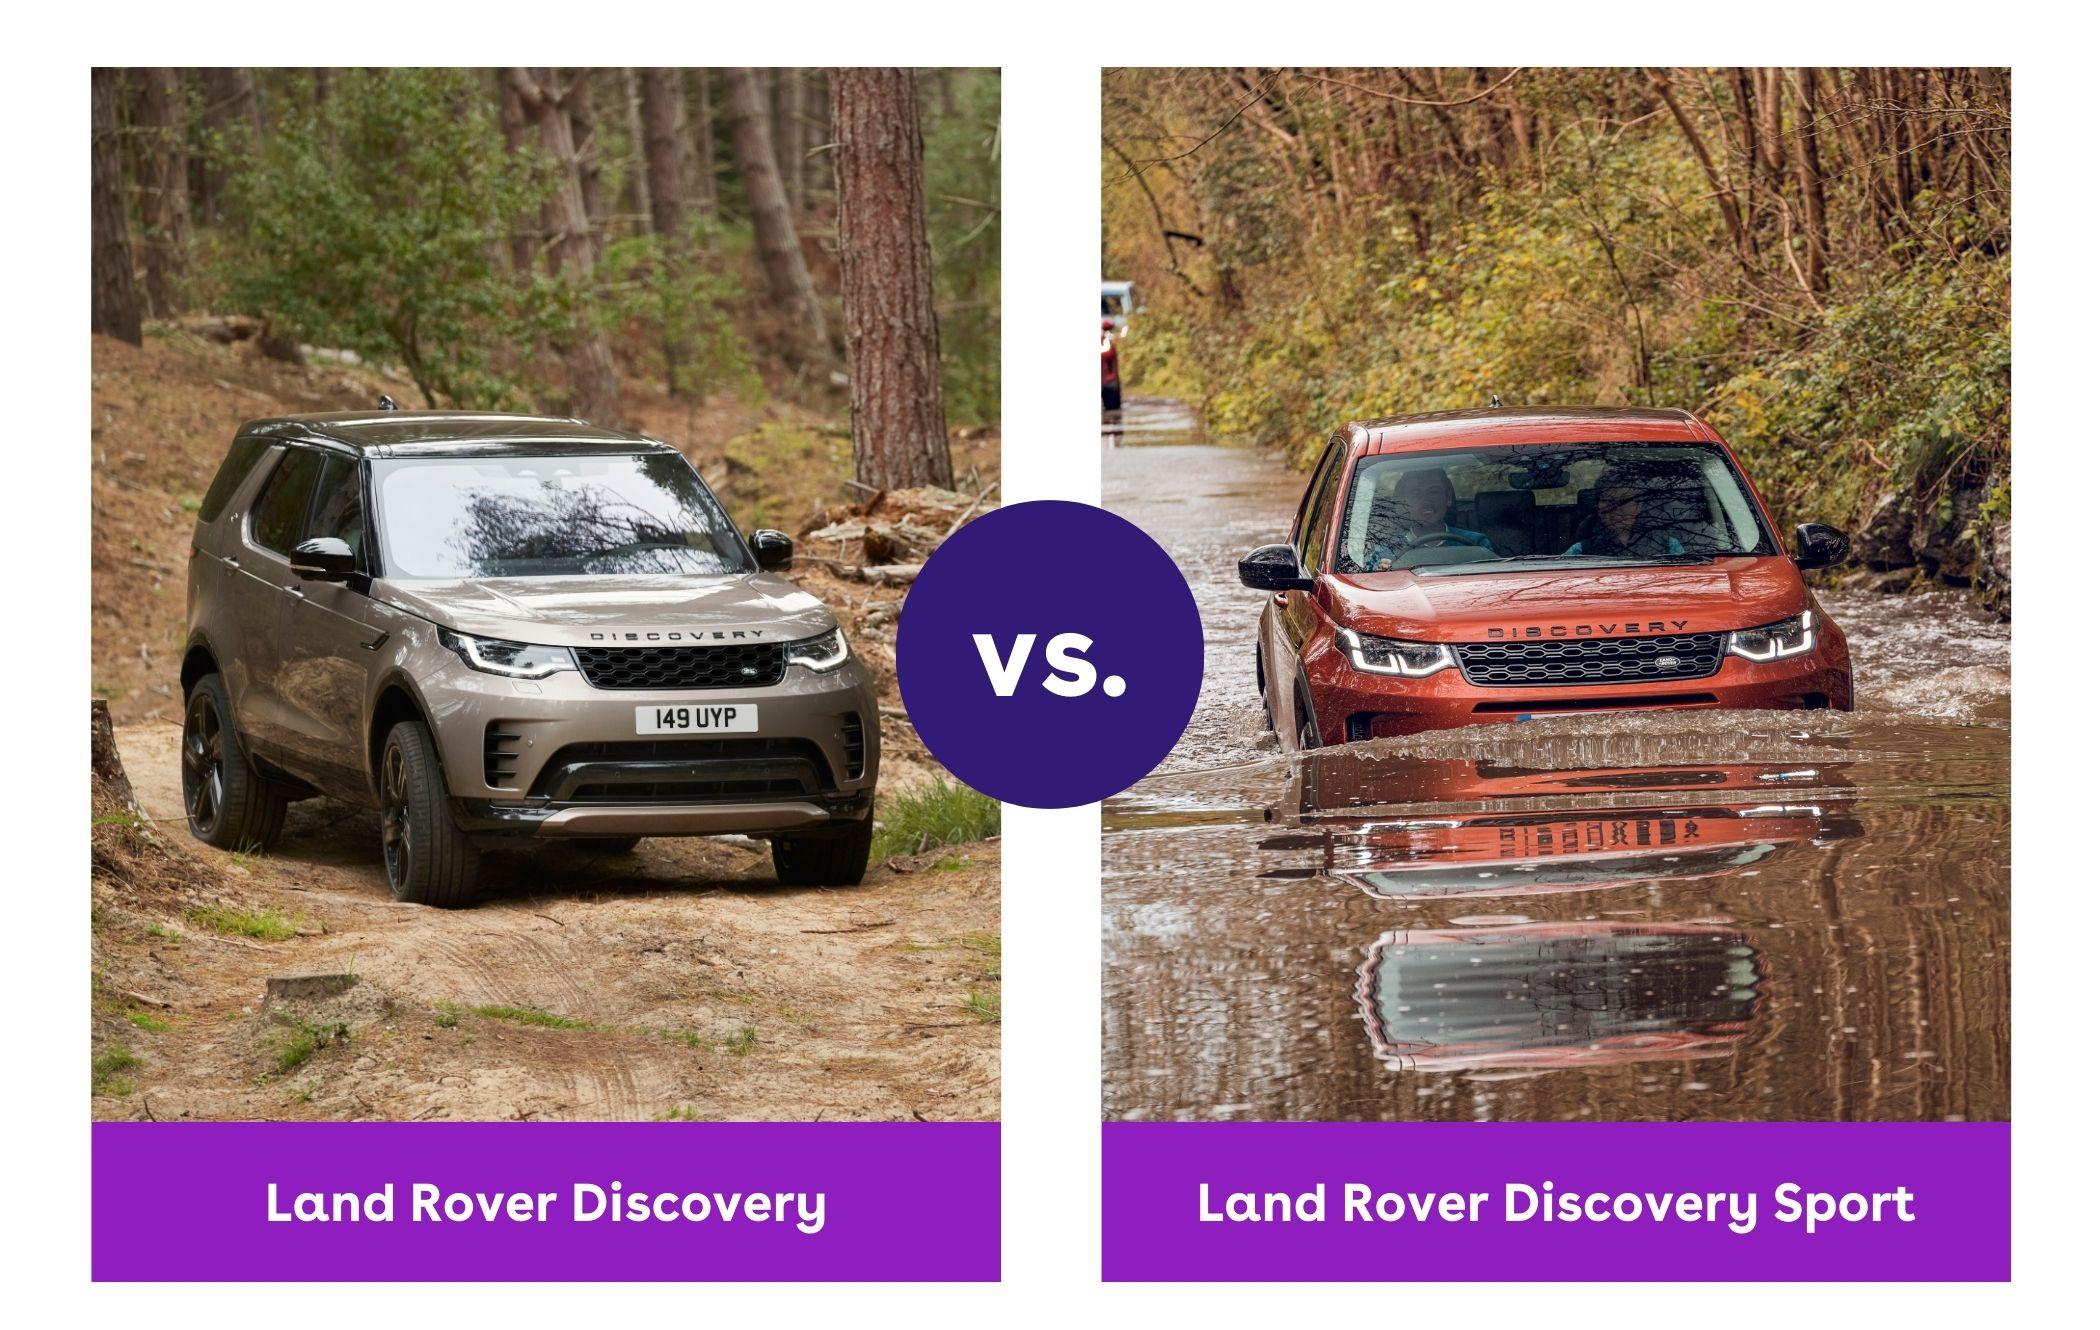 Side-by-side image of Land Rover Discovery and Discovery Sport off-roading